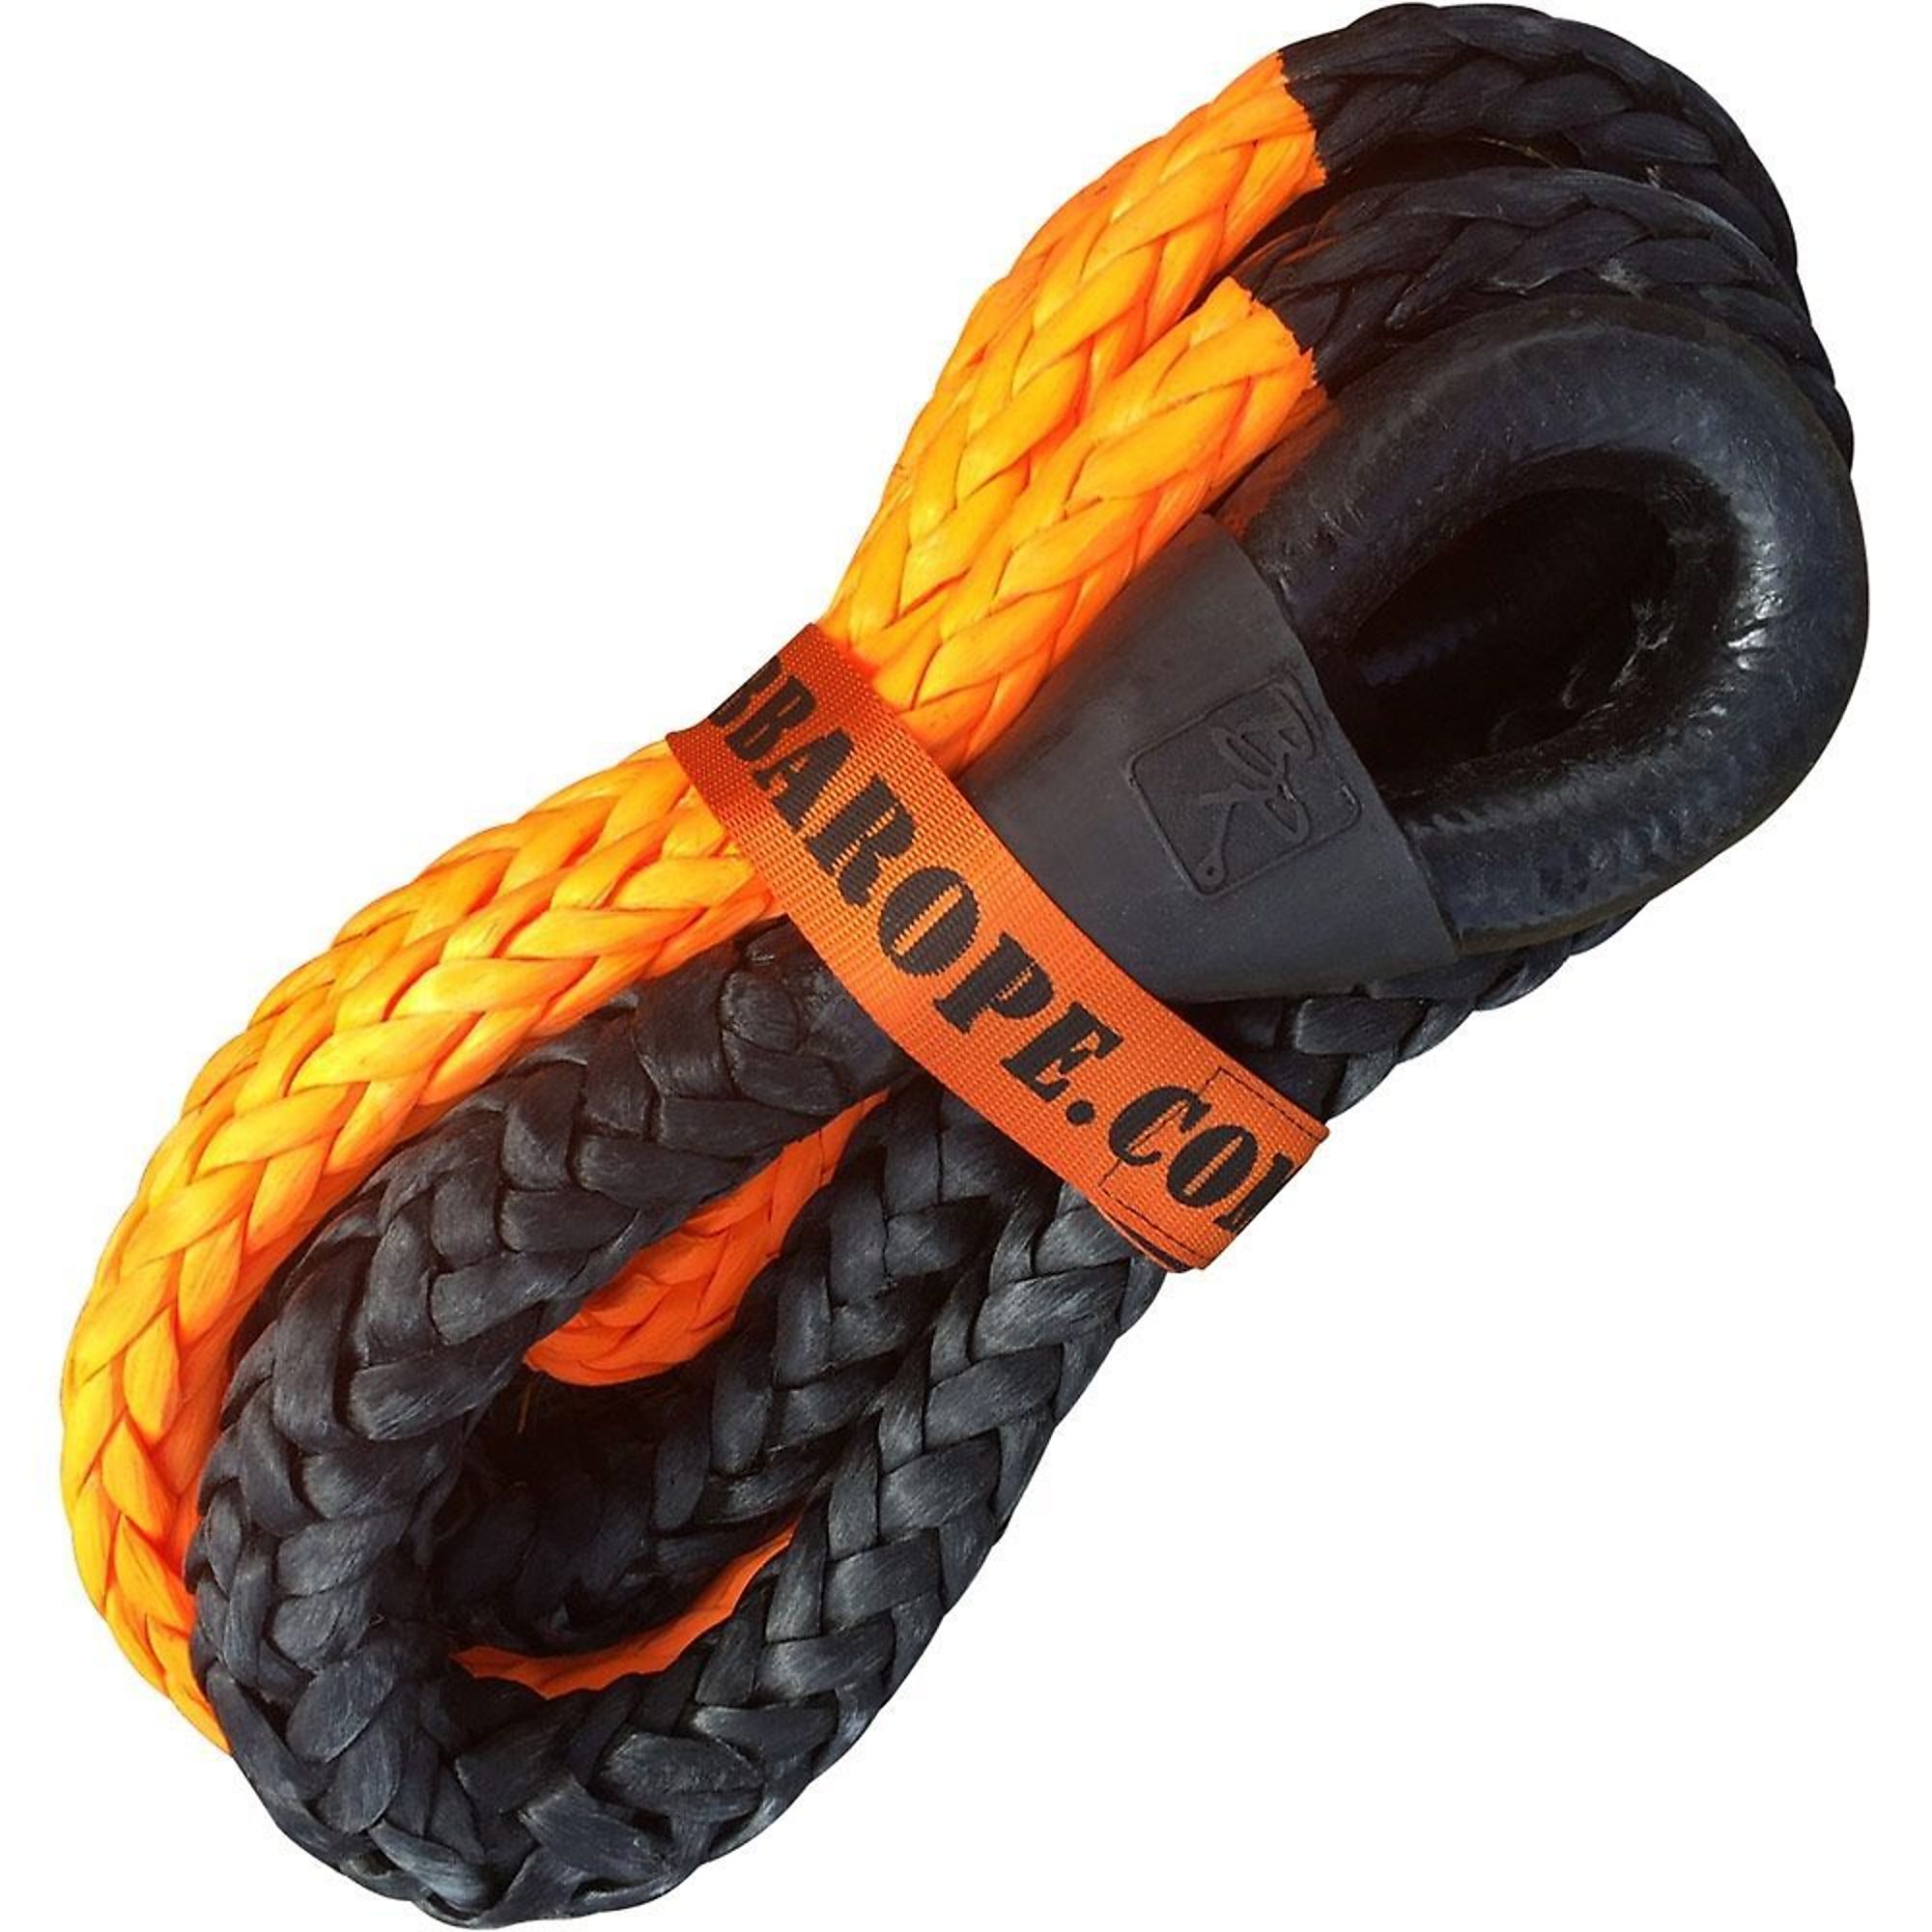 Bubba Rope, HMPE Tow Line for Tractors and Dump Trucks, Length 240 in, Material HMPE, Model 176759MT20